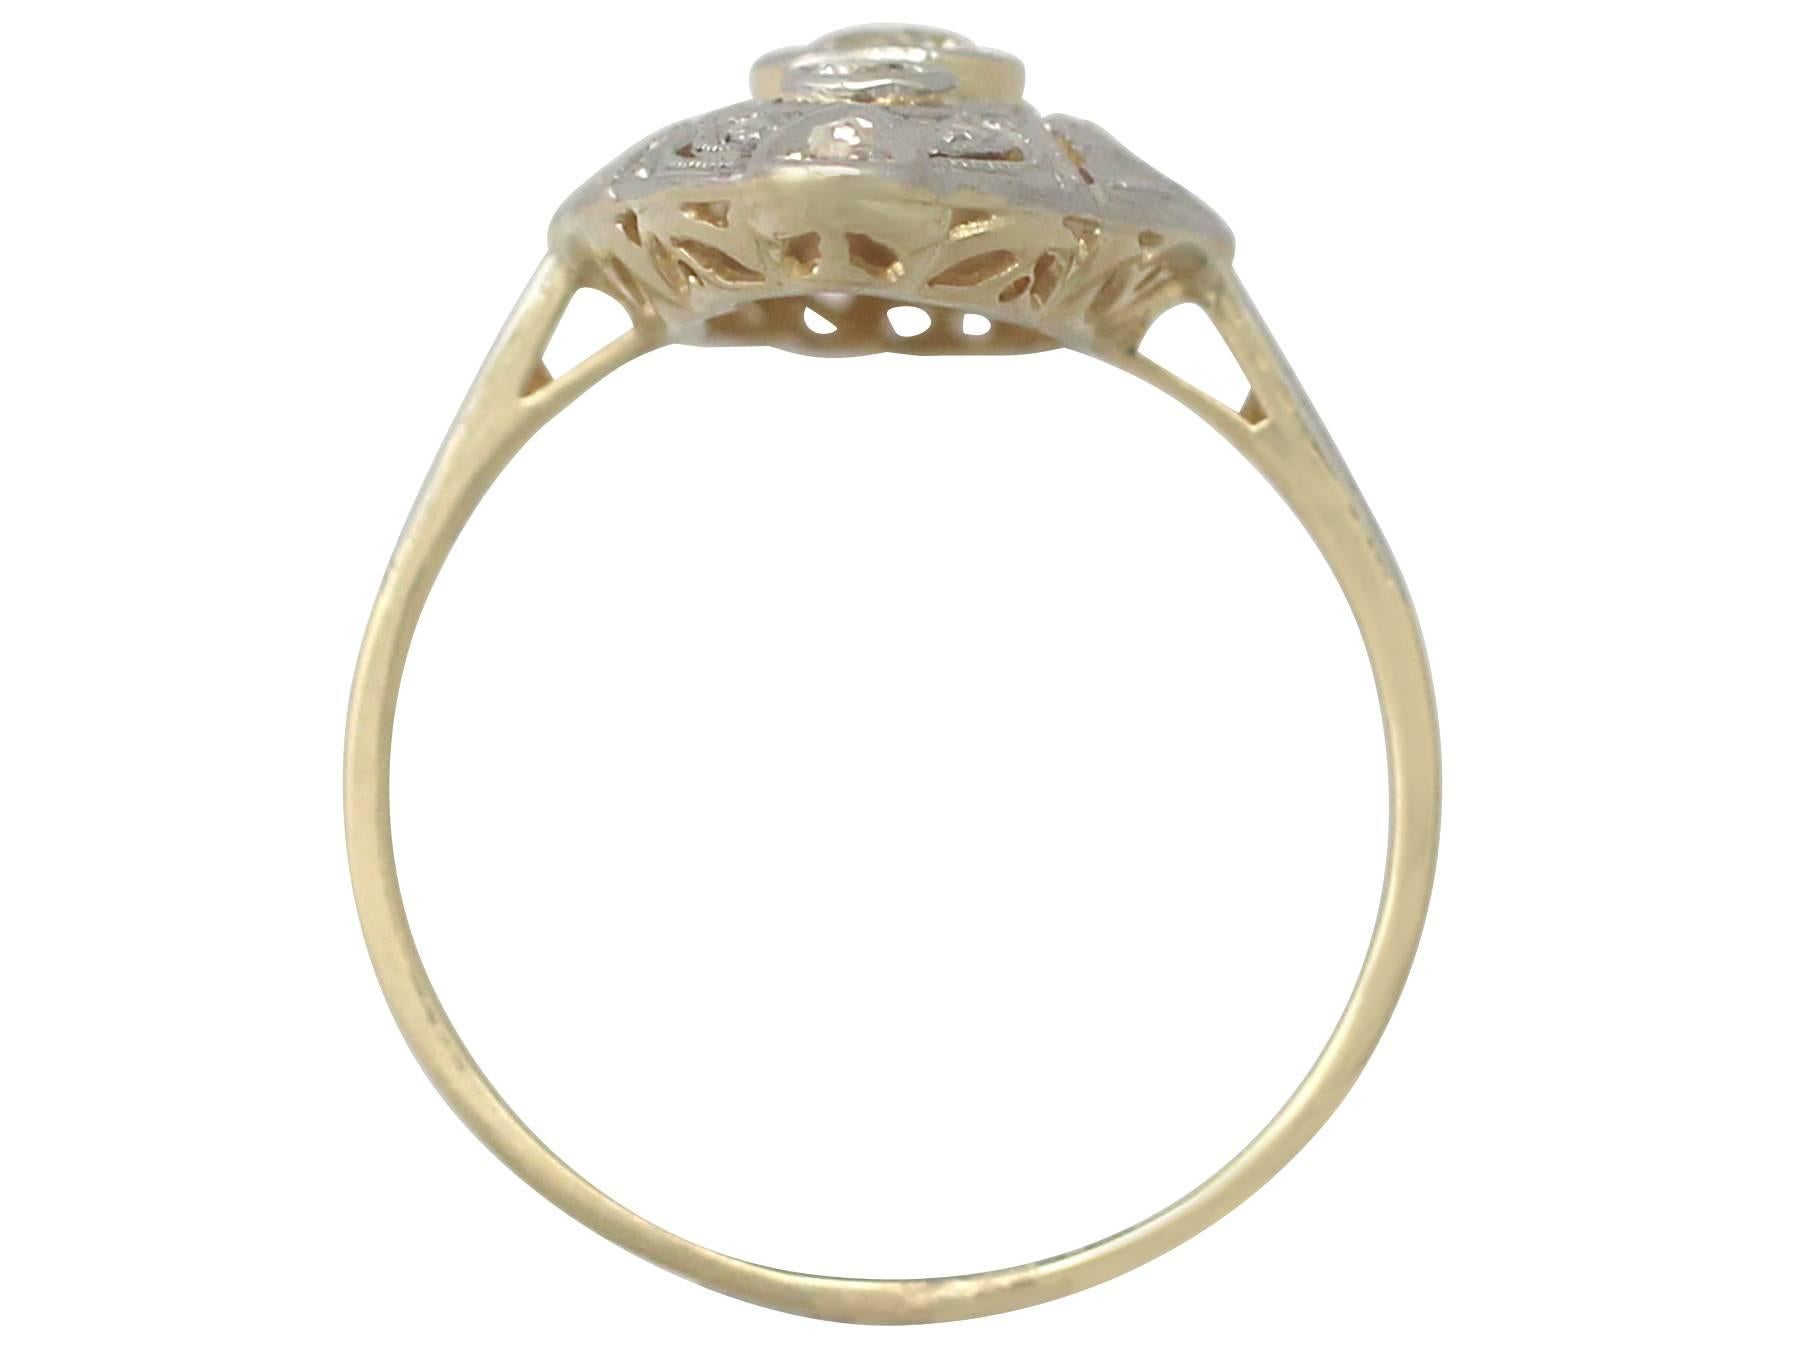 This fine and impressive antique Art Deco diamond ring has been crafted in 14k yellow gold with a 14k white gold setting.

The pierced decorated marquise shaped frame is ornamented with a feature 0.24 ct Old European round cut diamond flanked to the